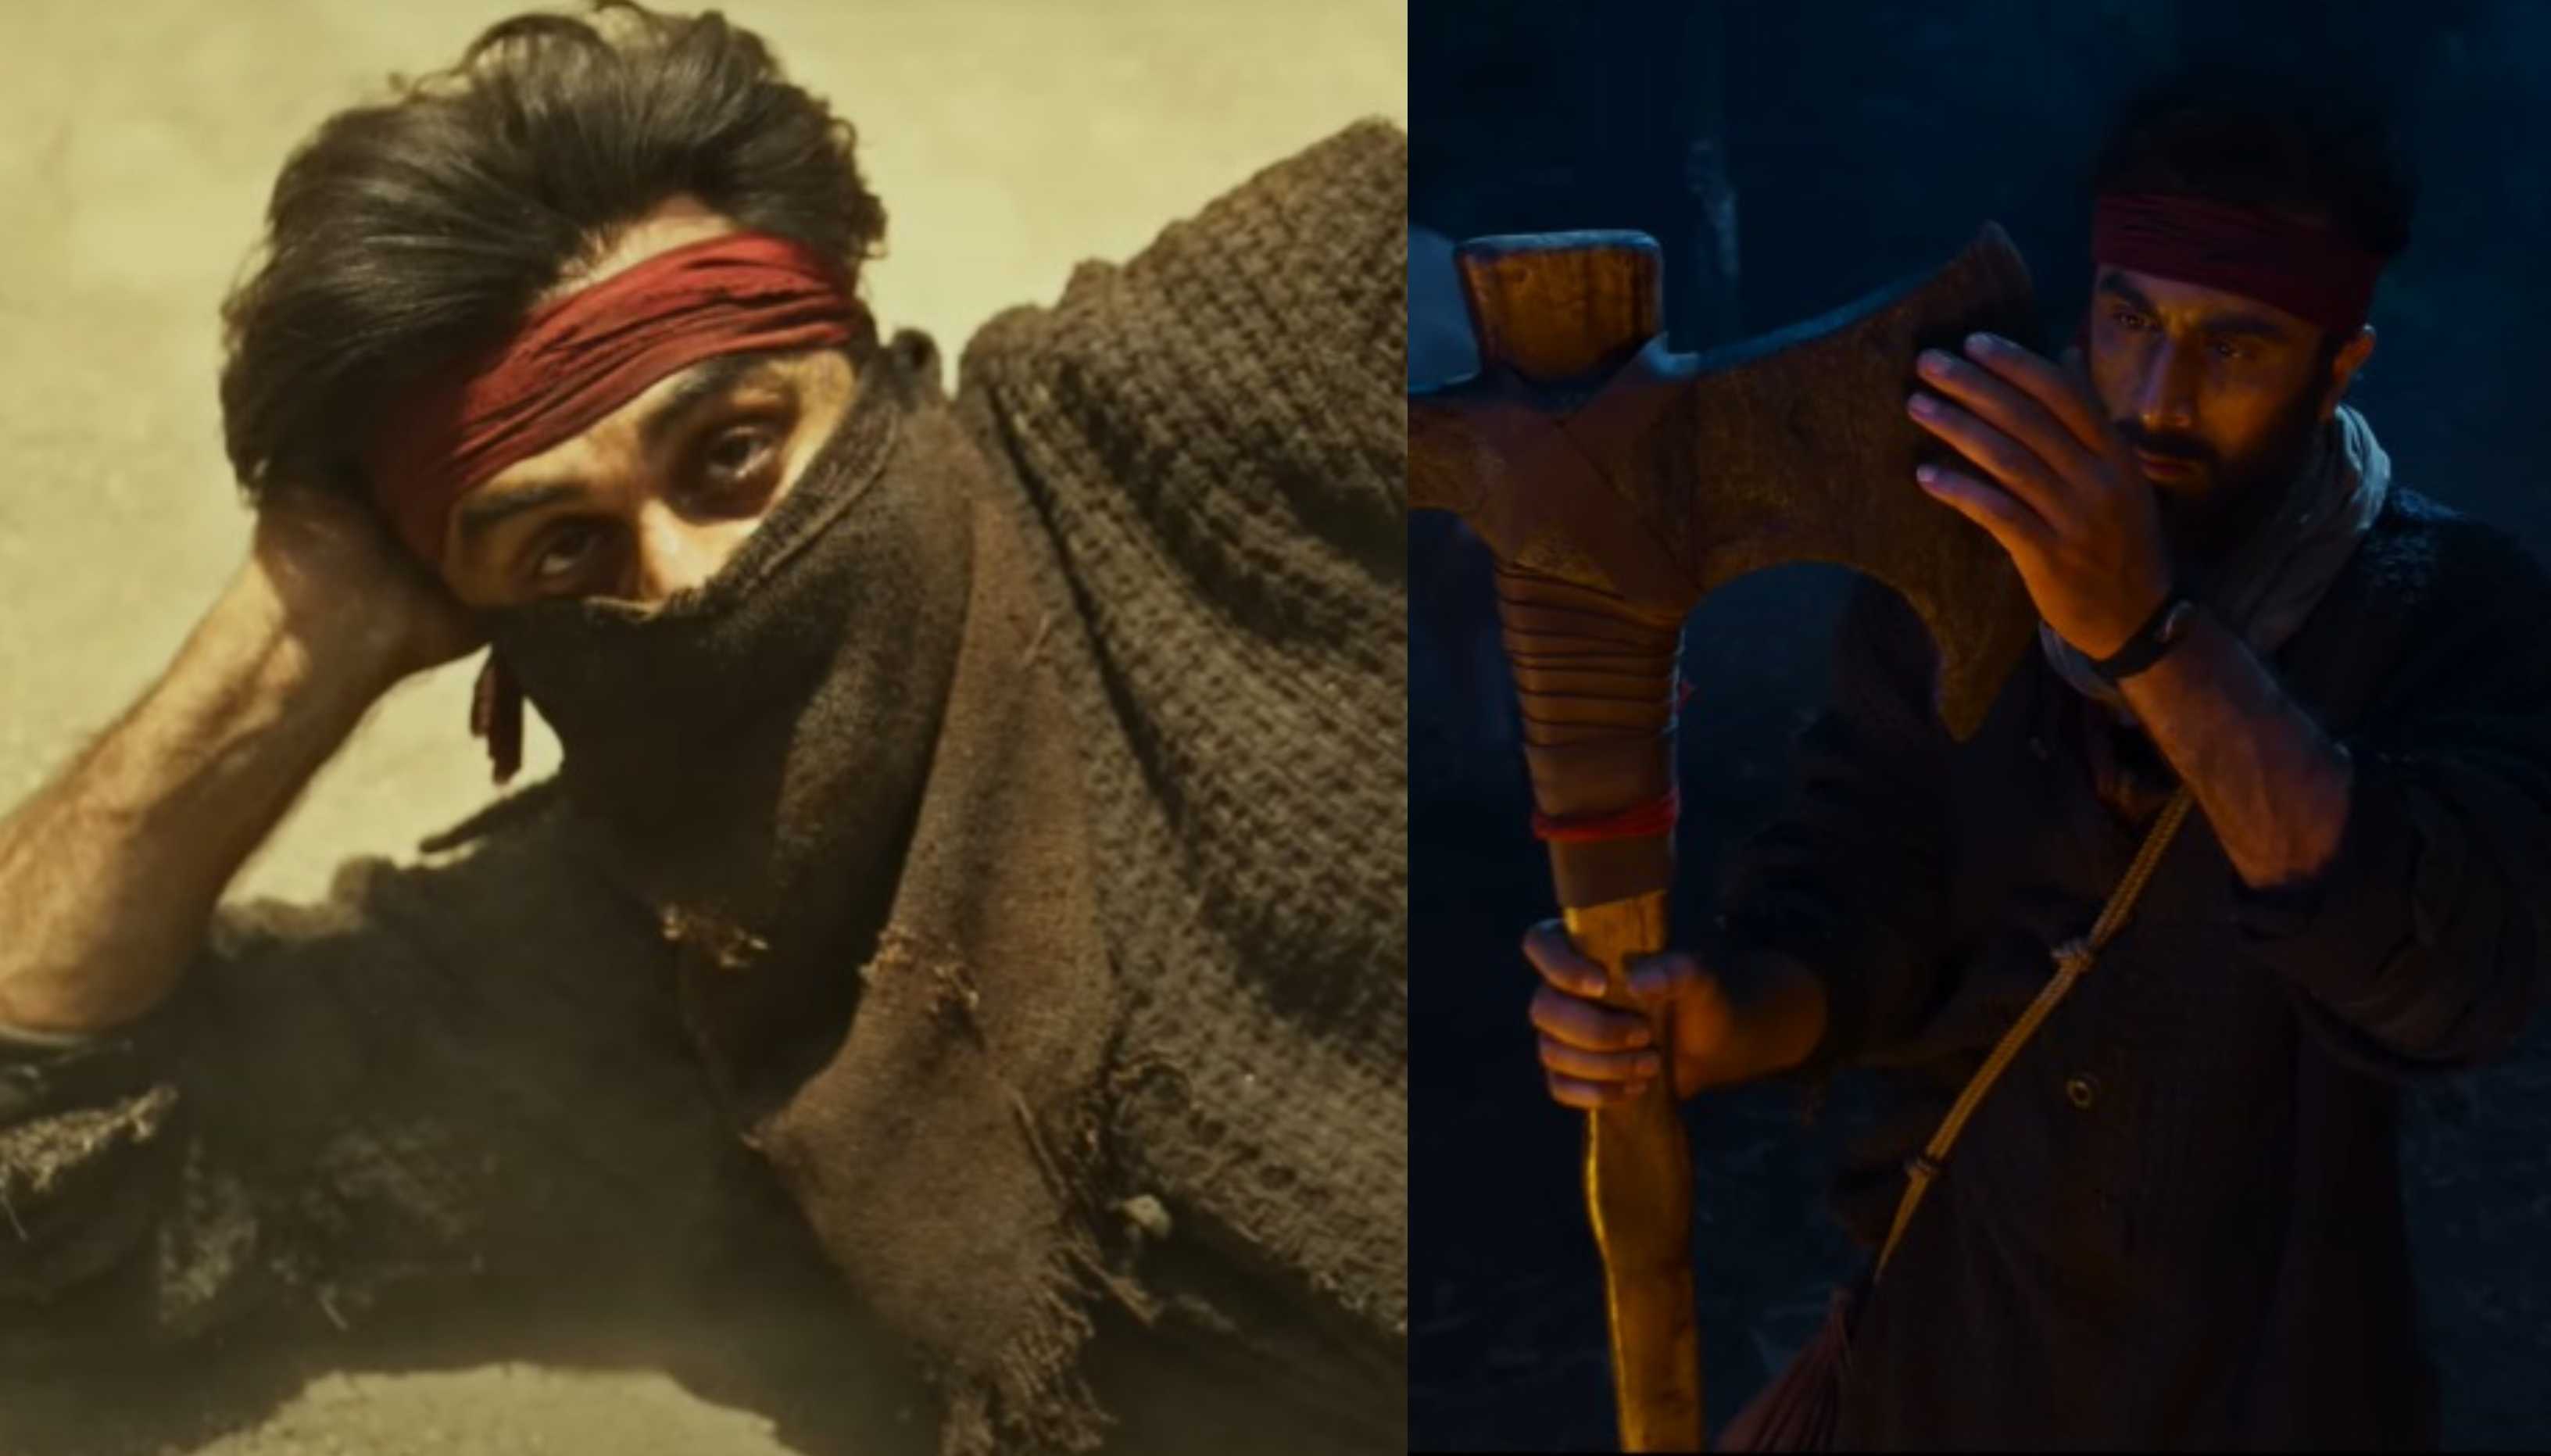 Shamshera Review: Ranbir Kapoor makes a majestic comeback with a masala entertainer Bollywood desperately needed